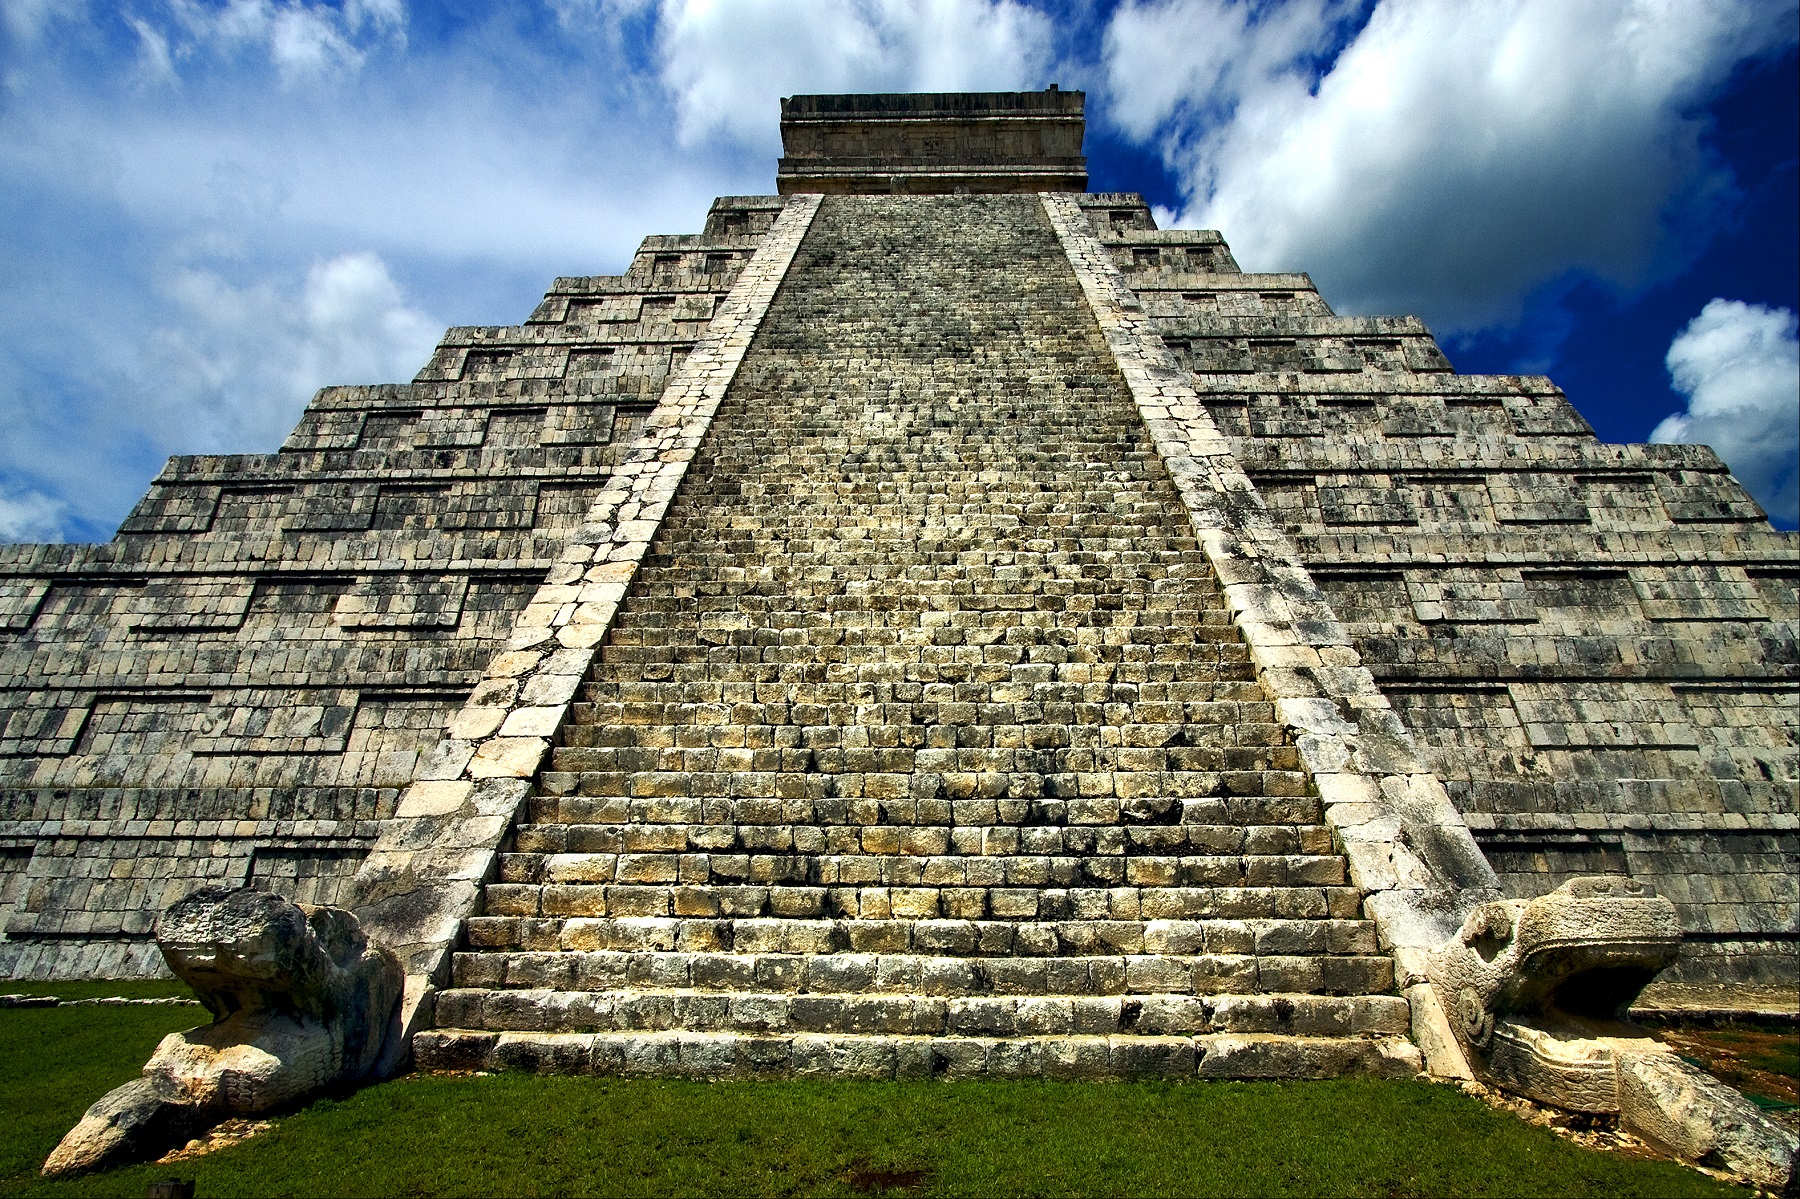 A photograph showing the stairs of the pyramid of El Castillo at Chichen Itza that lead towards its summit. Shutterstock.